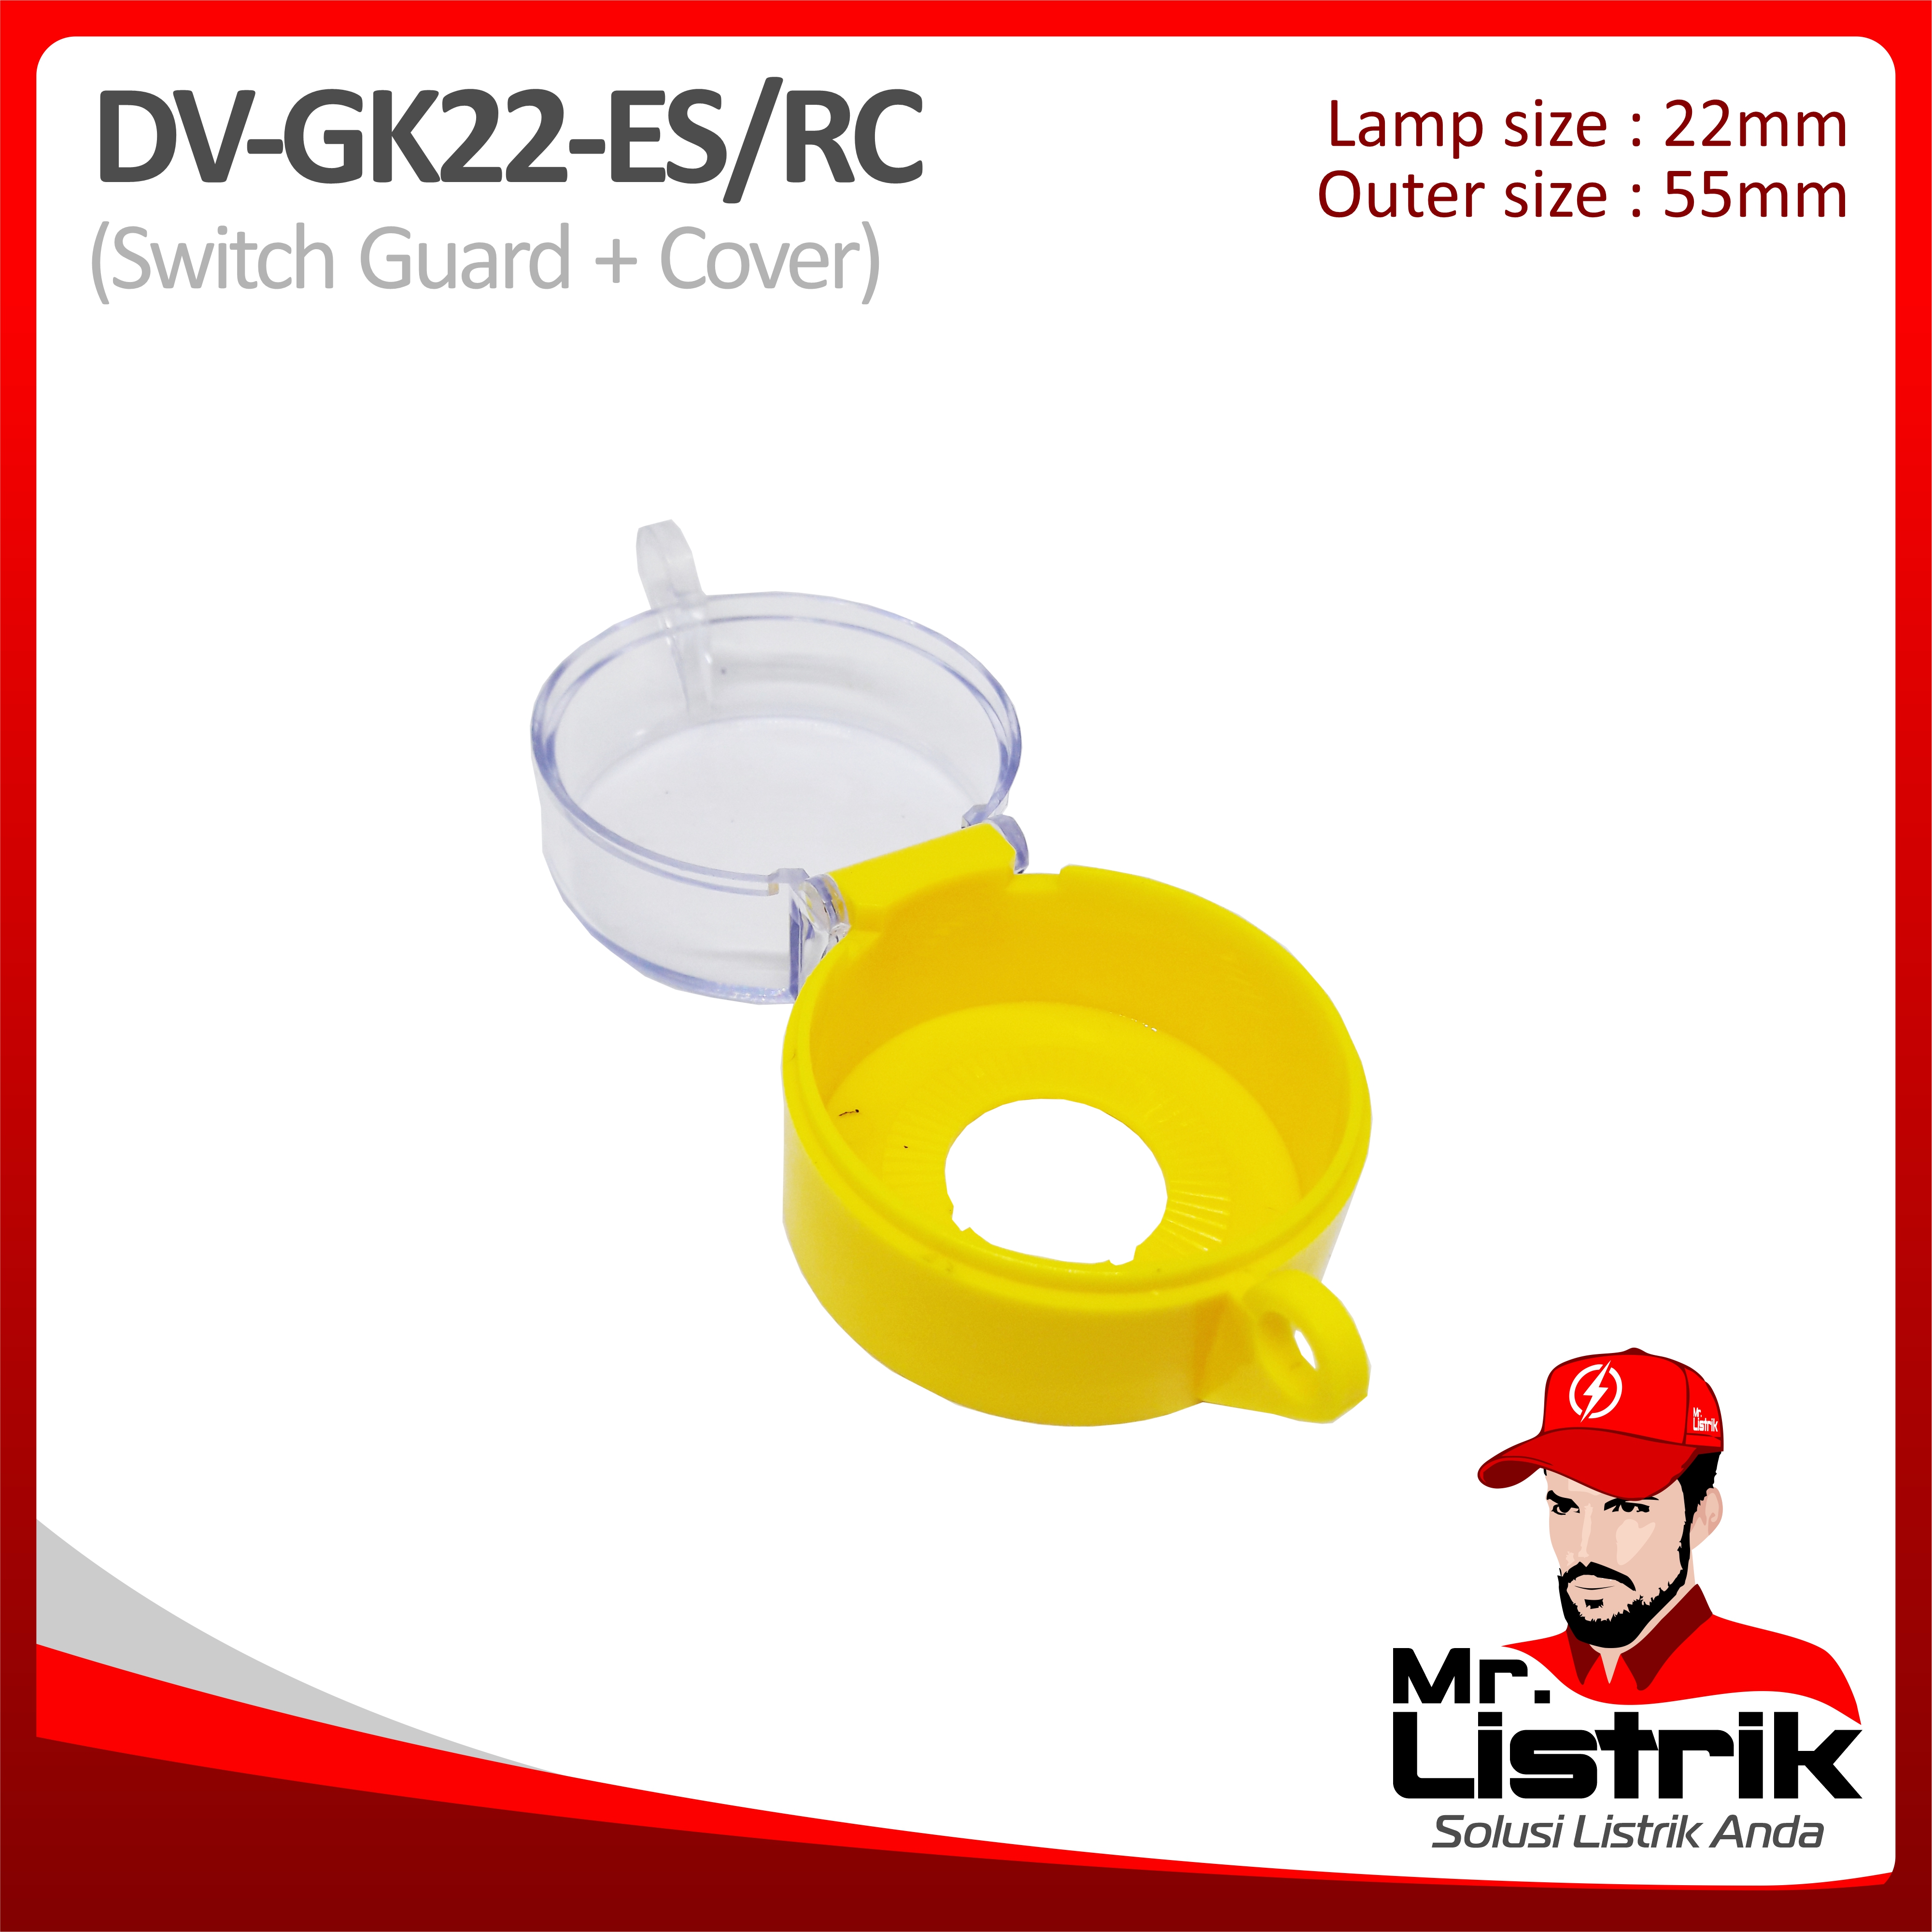 Switch Guard + Cover Push Button 22mm DV Yellow+Transparent GK22-ES/RC